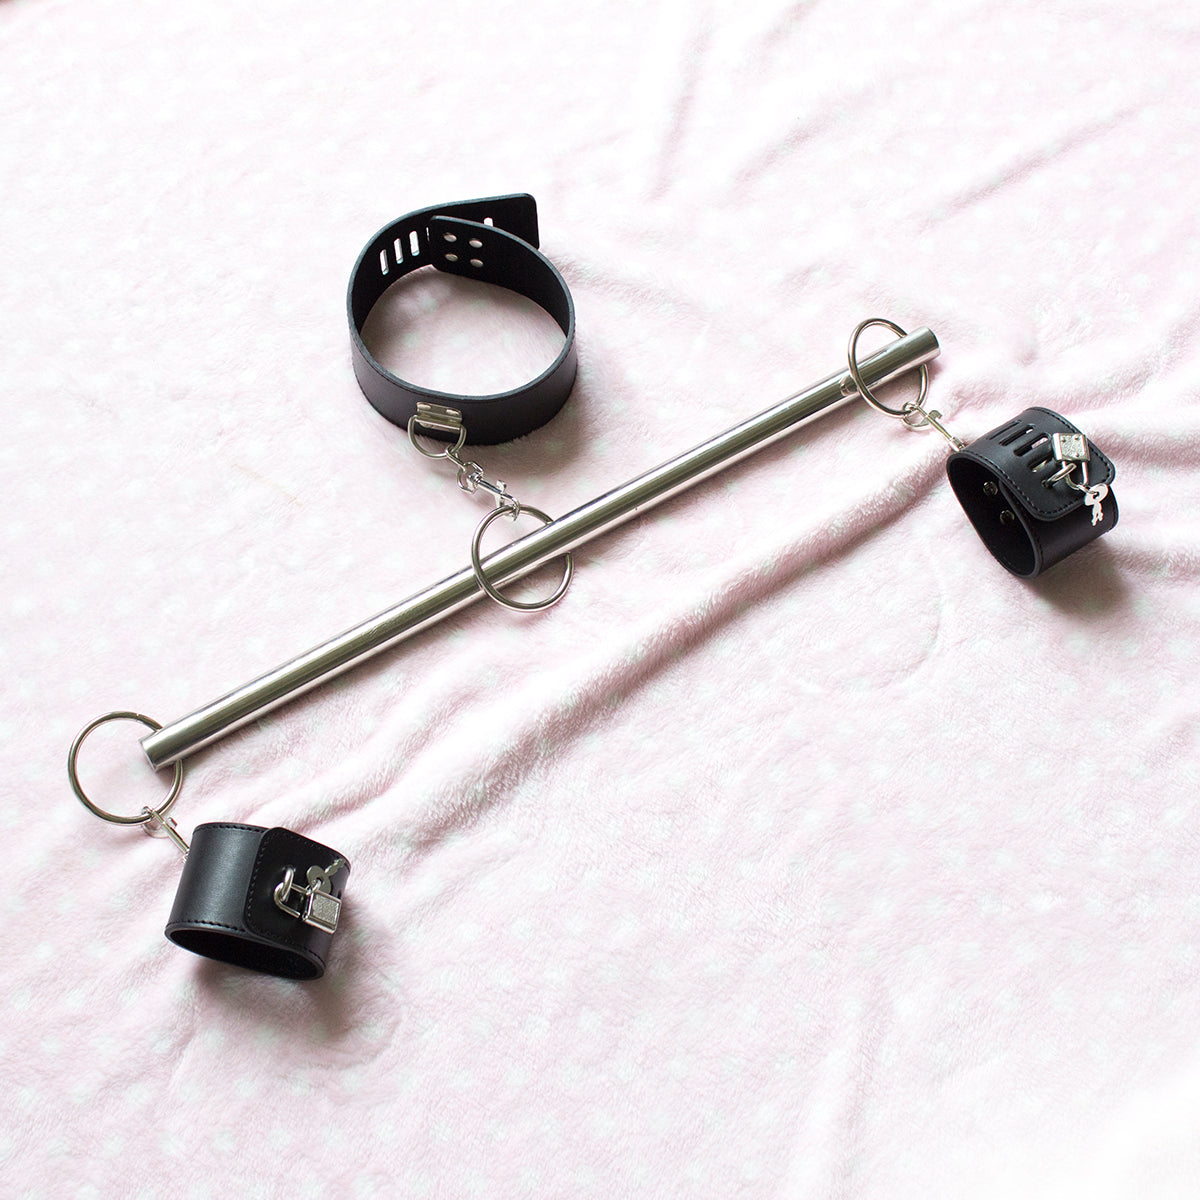 Undetachable Steel Spreader Bar with Collar and Handcuffs - Bondage Spreader Bar with Lock Leather Restraints Wrist Cuff and Collar for BDSM Dominatrix Kinky Fetish